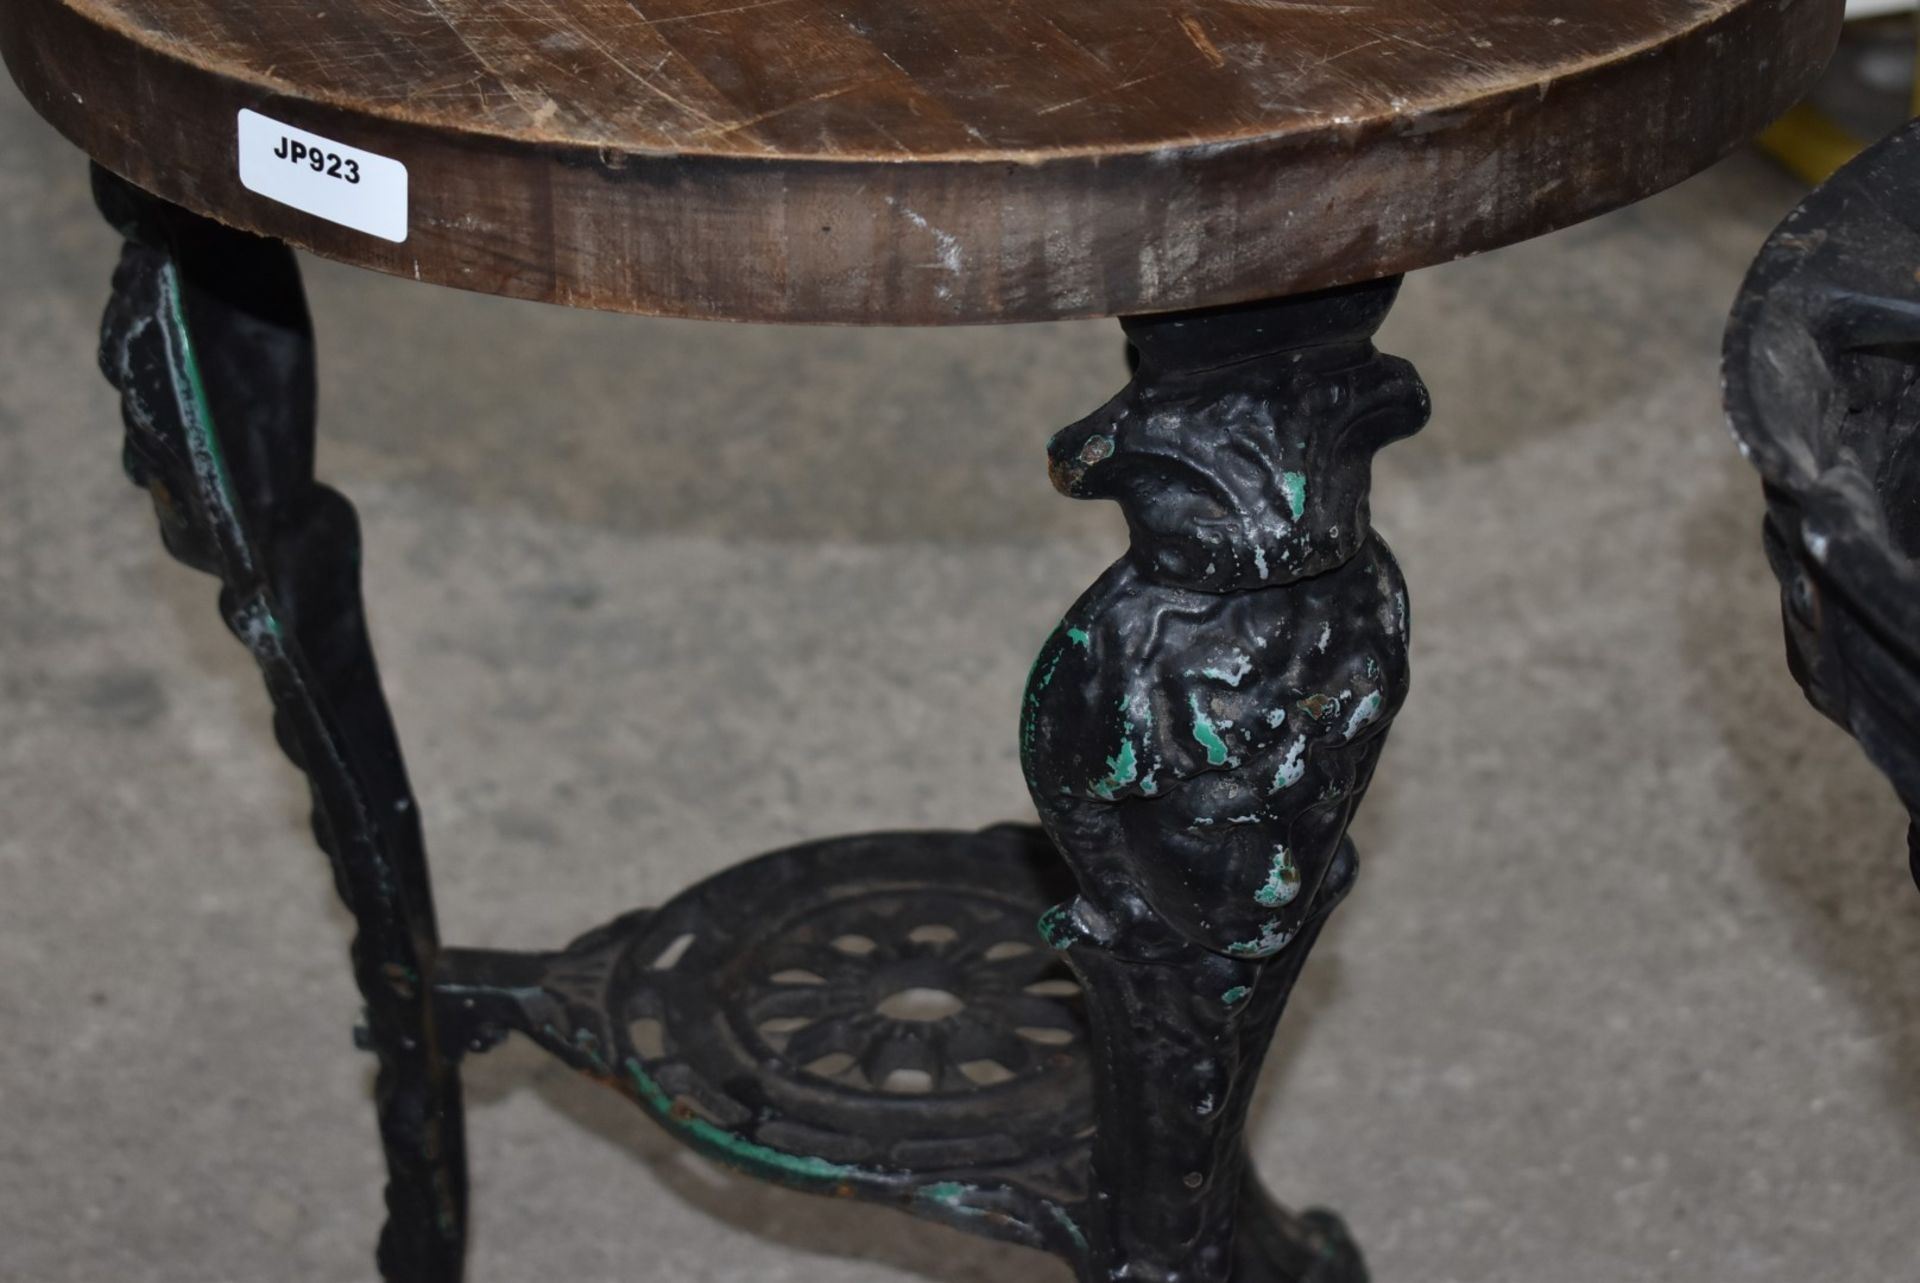 2 x Vintage Ornate Cast Iron Table Bases With Wooden Top - Dimensions: H70 x W50 cms - Ref: JP923 - Image 6 of 8